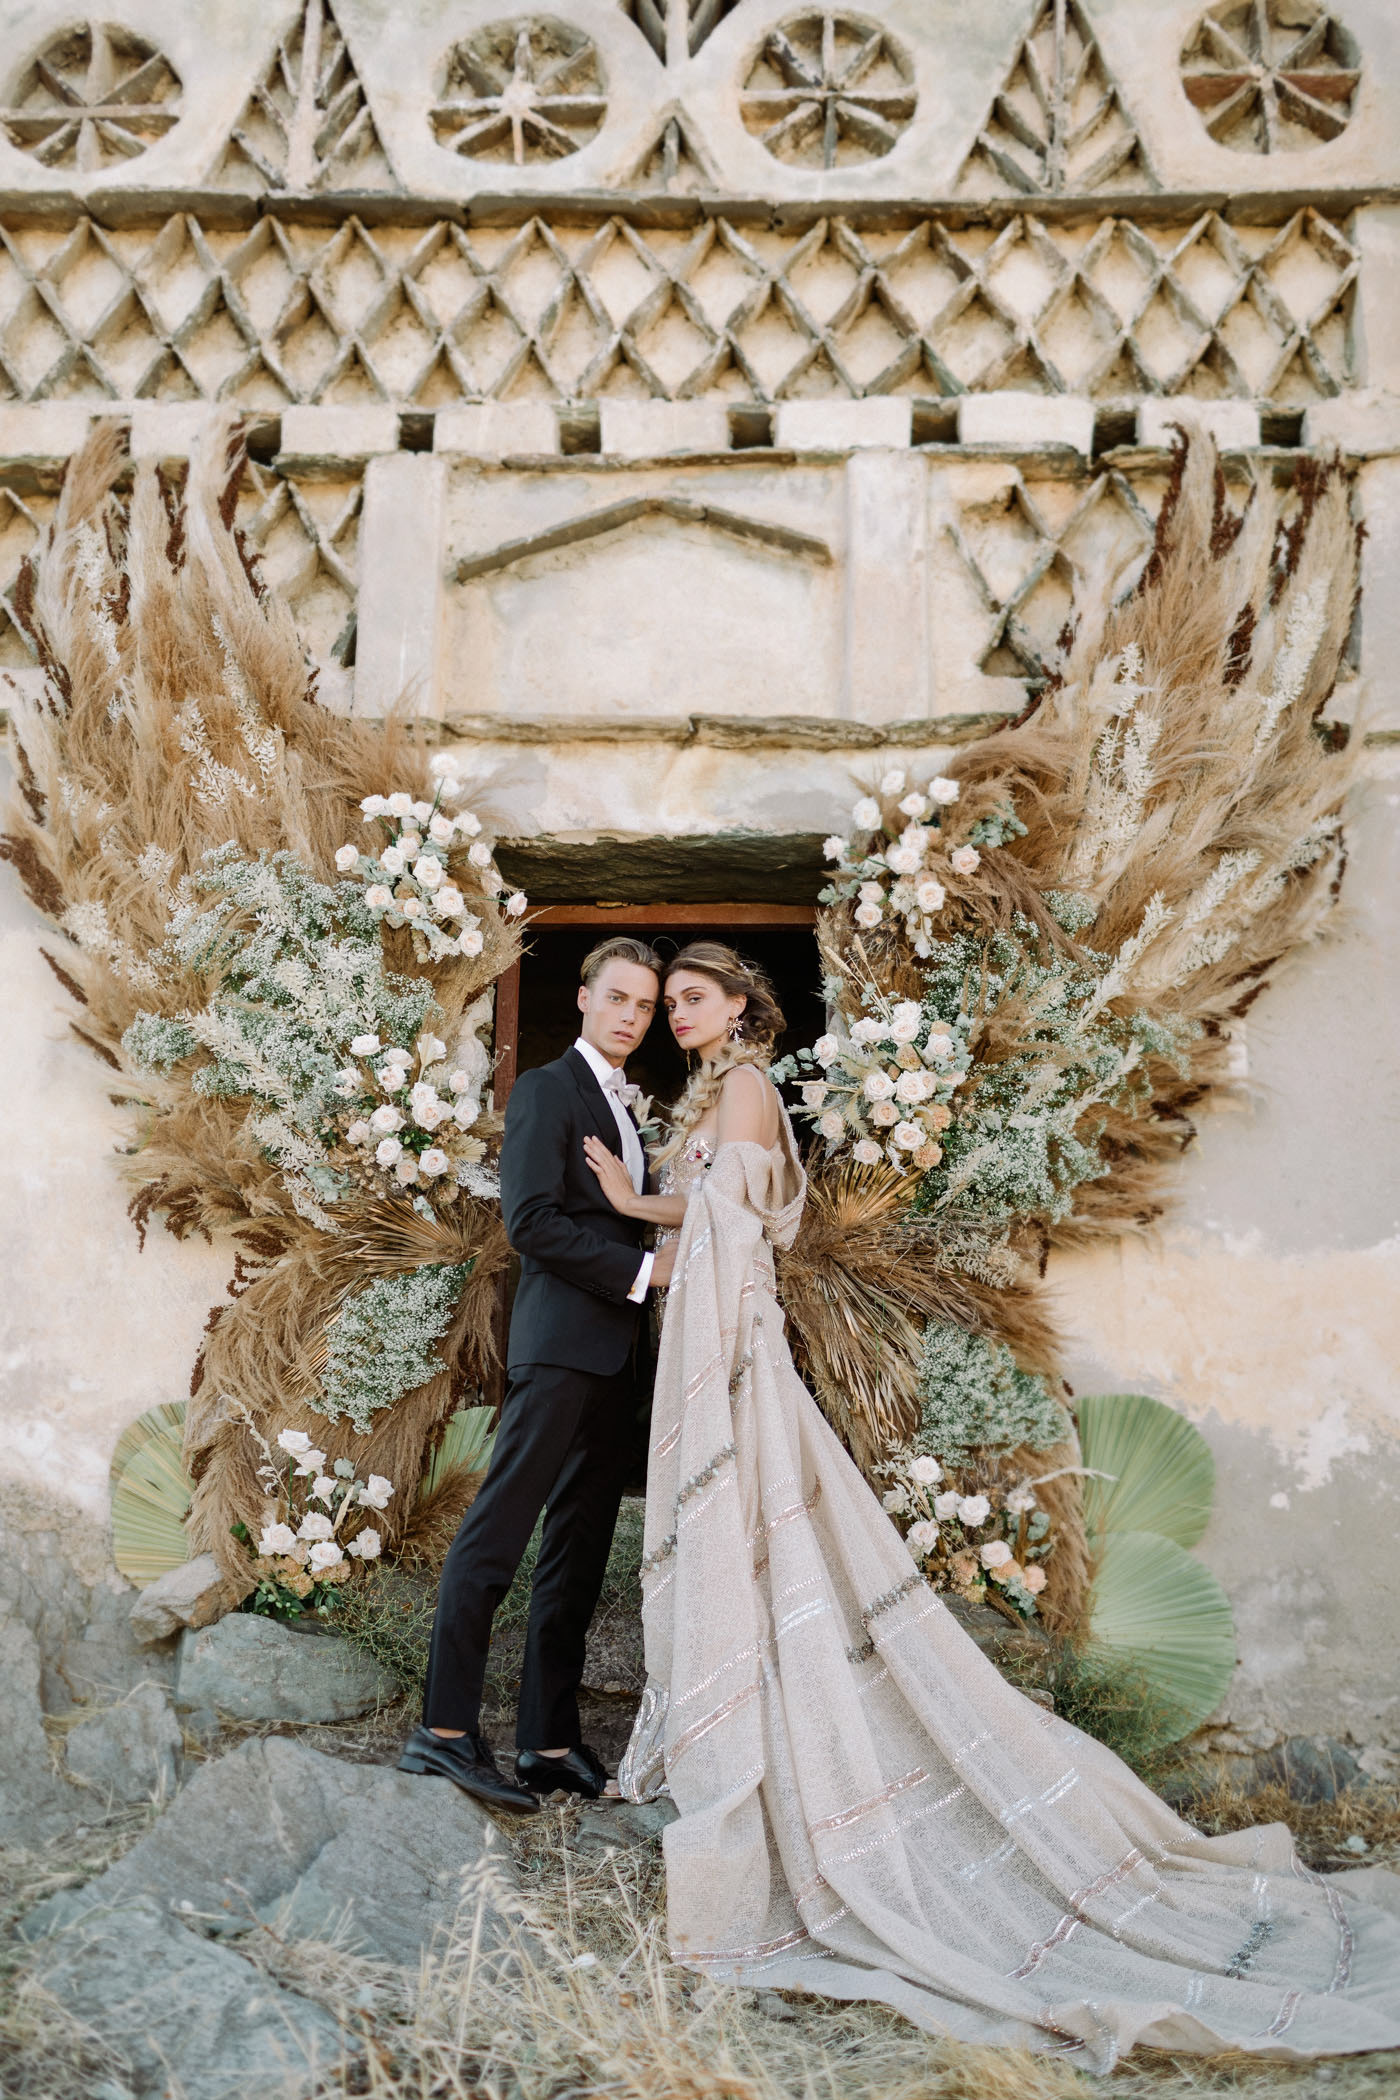 Dried Flower Wings Ceremony Decor